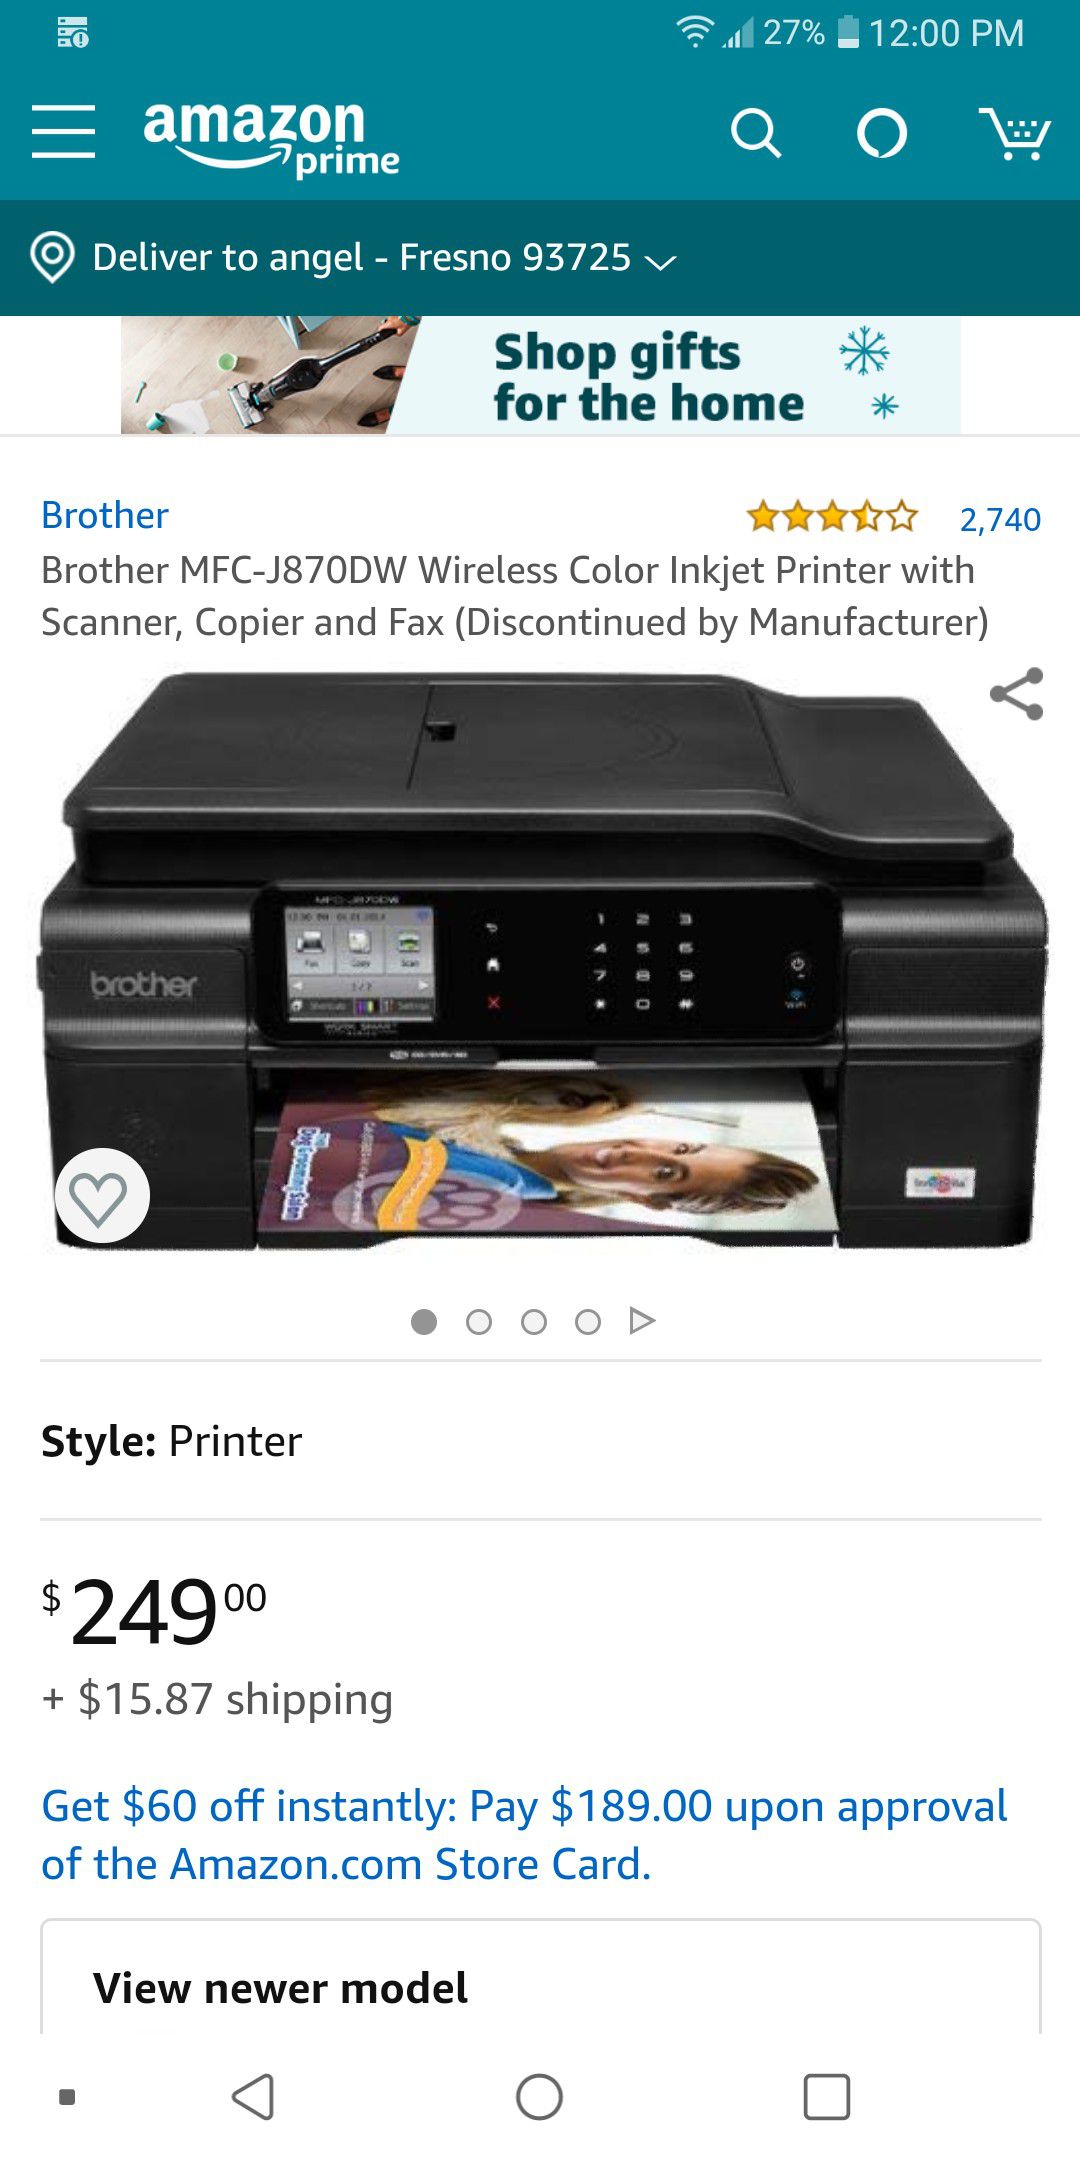 Brother printer and more